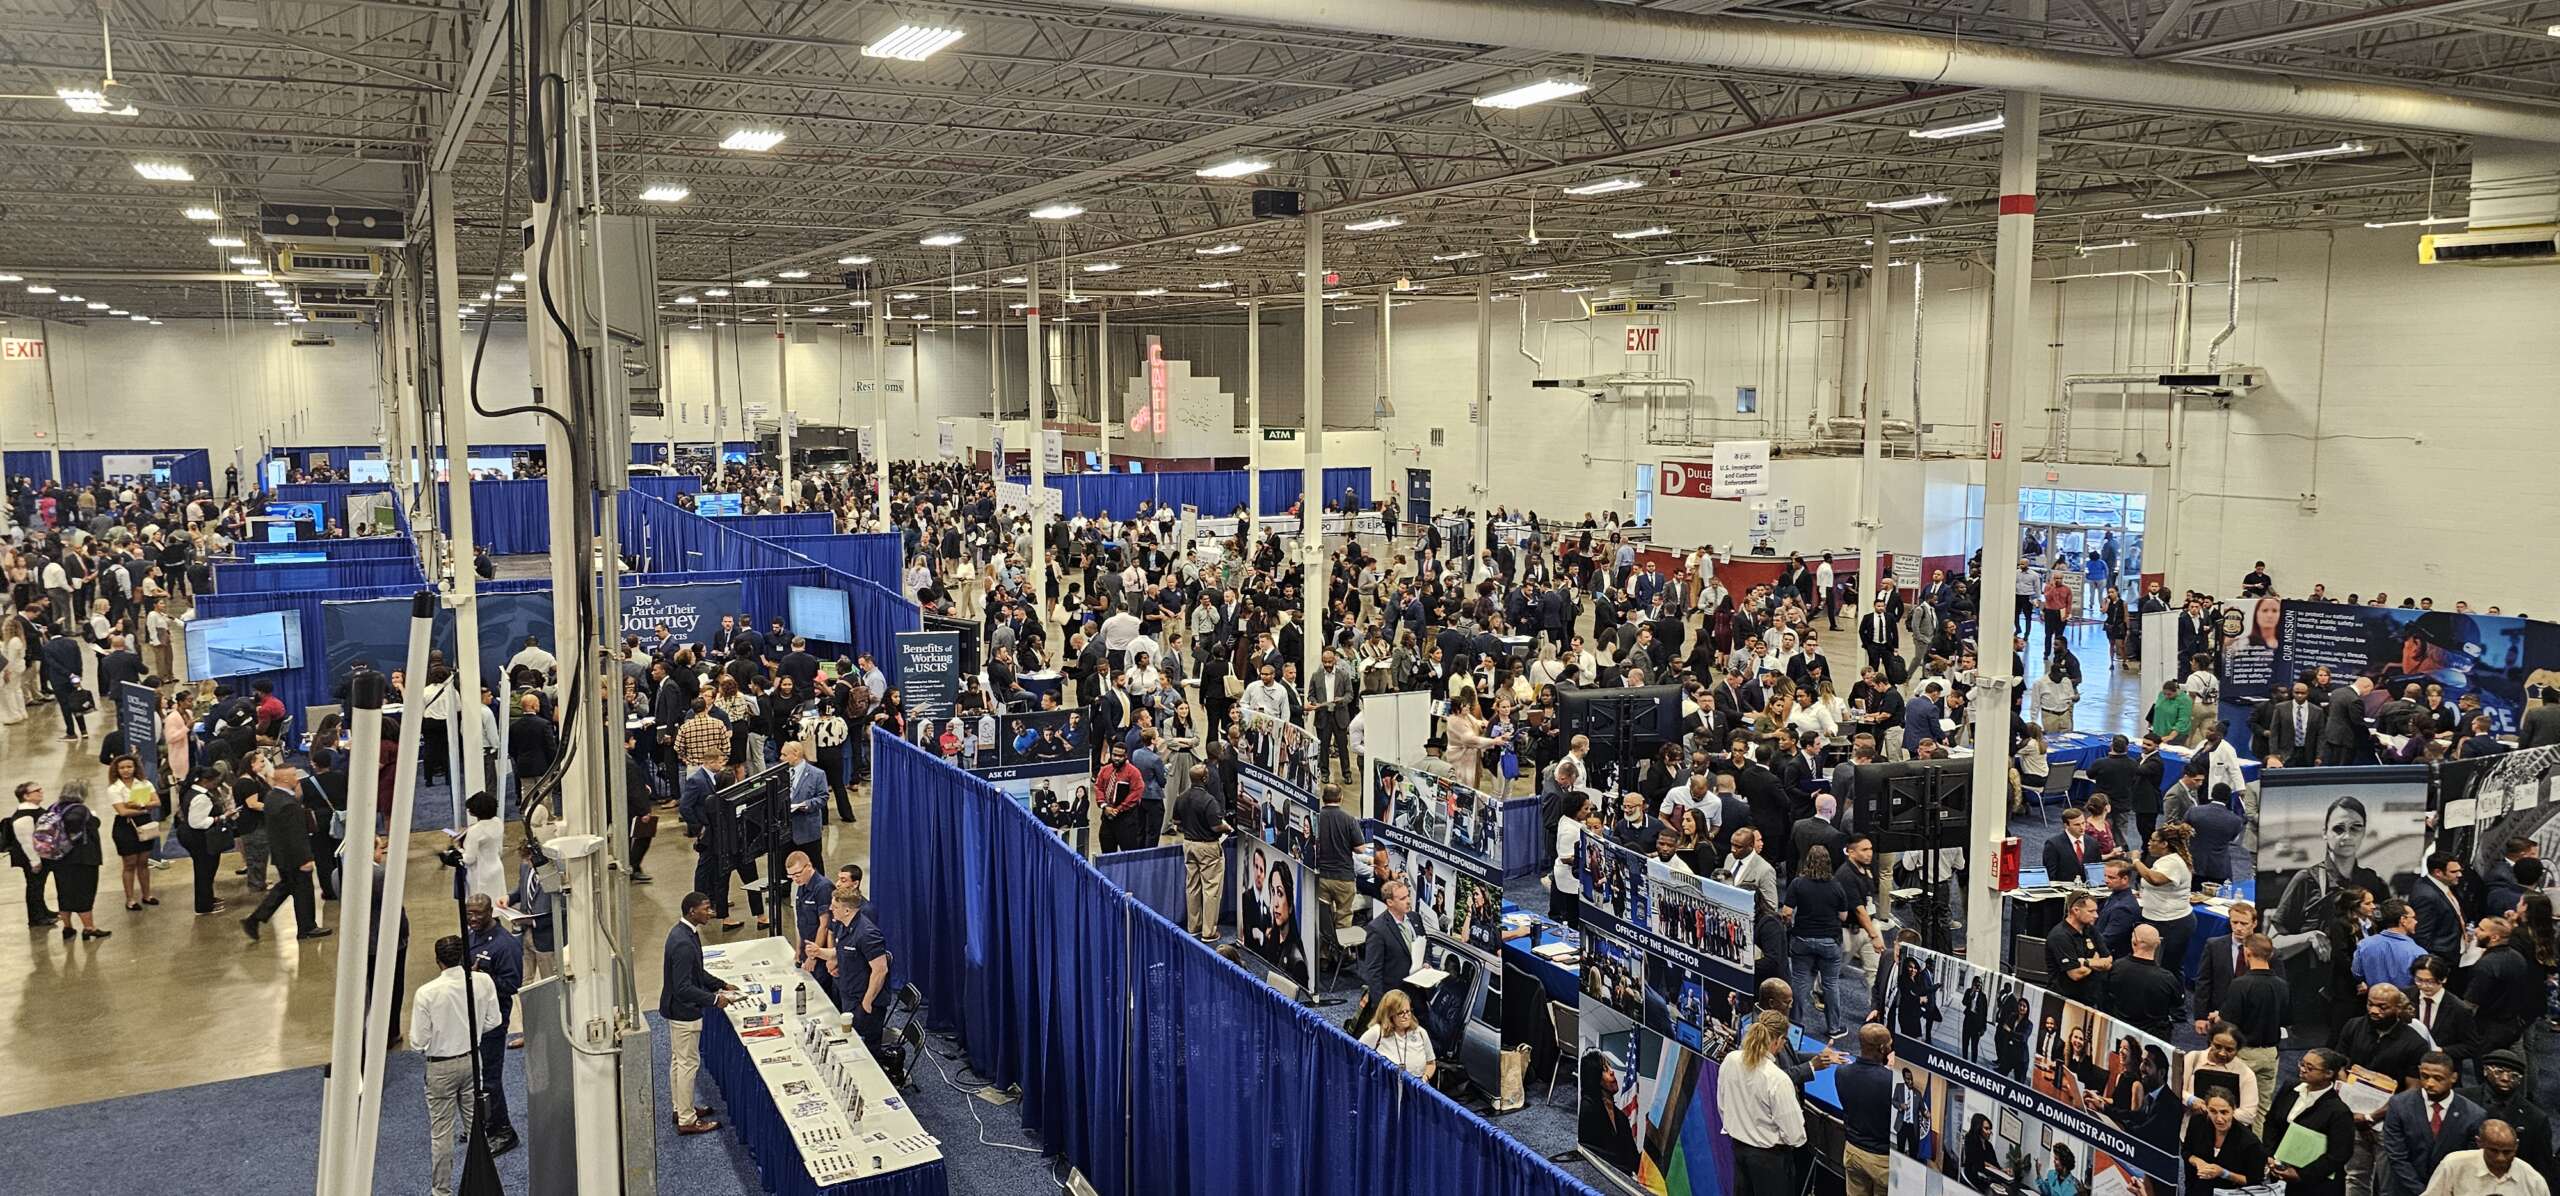 Image of DHS career expo crowd.